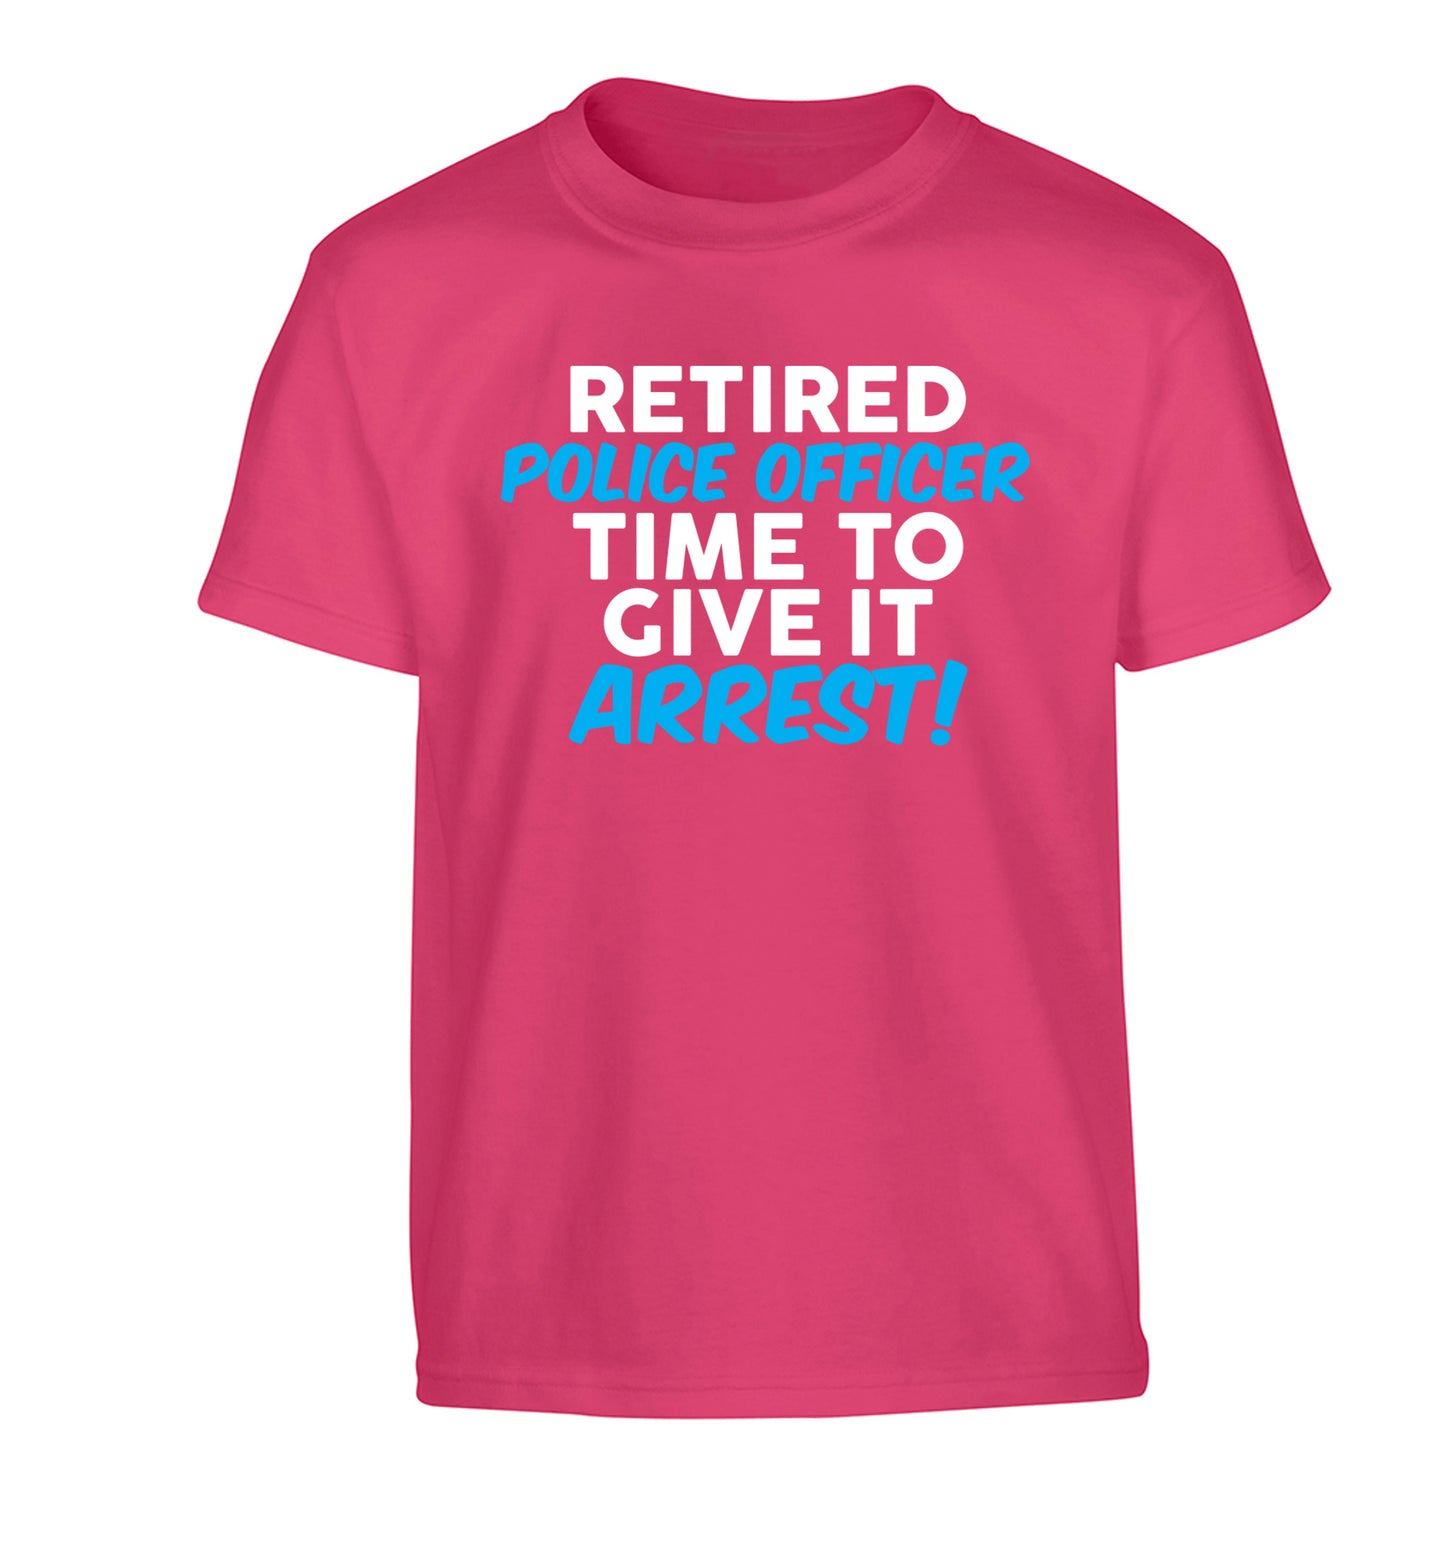 Retired police officer time to give it arrest Children's pink Tshirt 12-13 Years